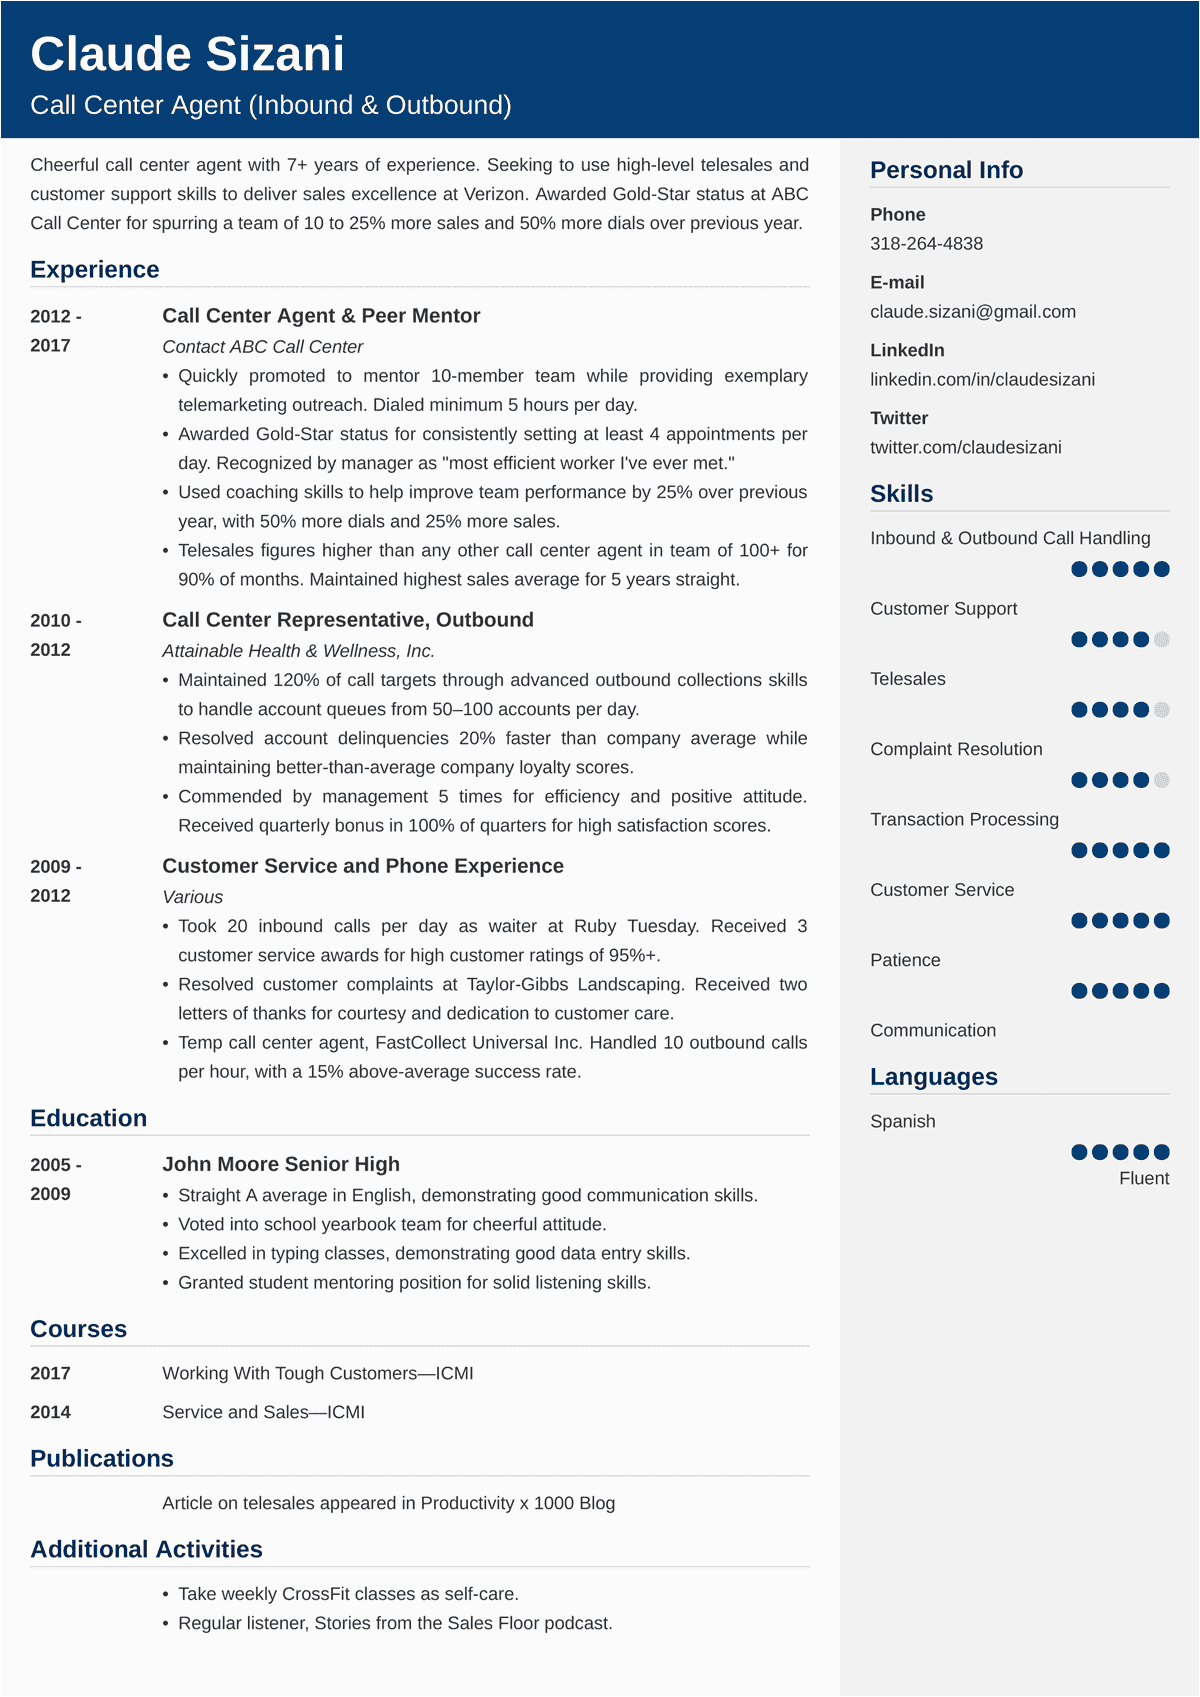 Resume Objective Sample for Call Center Call Center Resume Sample—25 Examples and Writing Tips